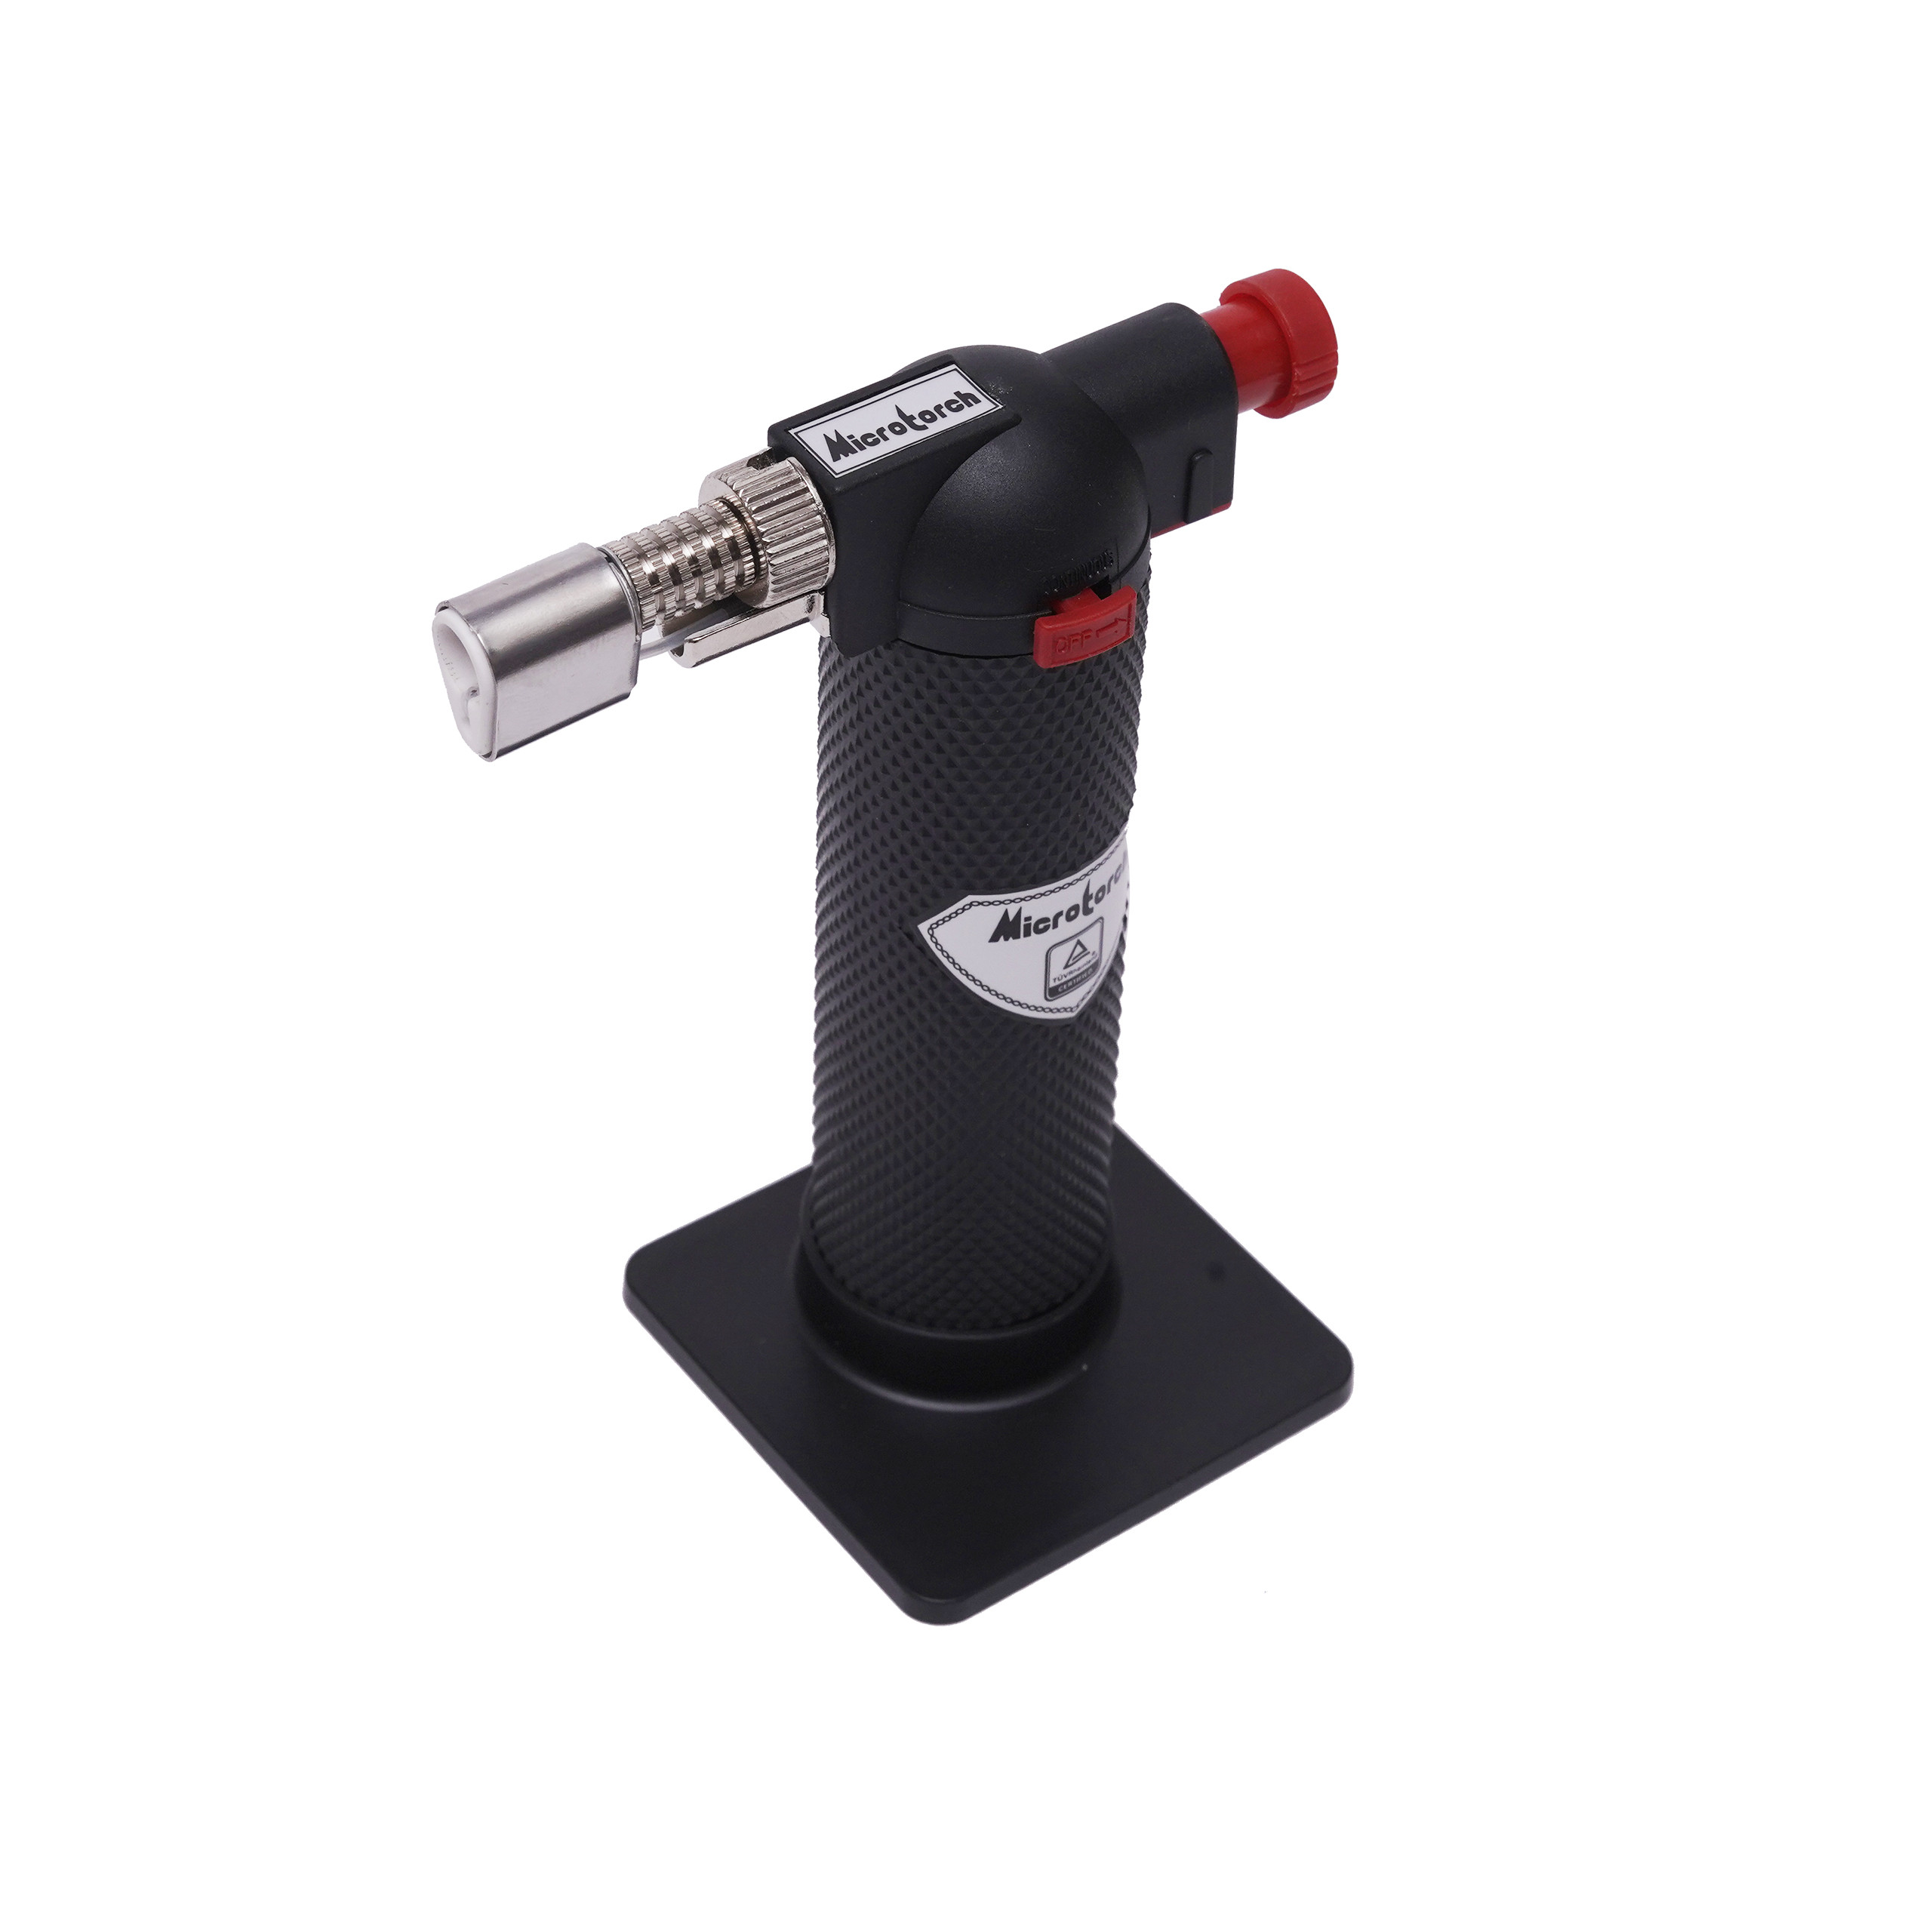 Libral Turbo Flame Micro Torch